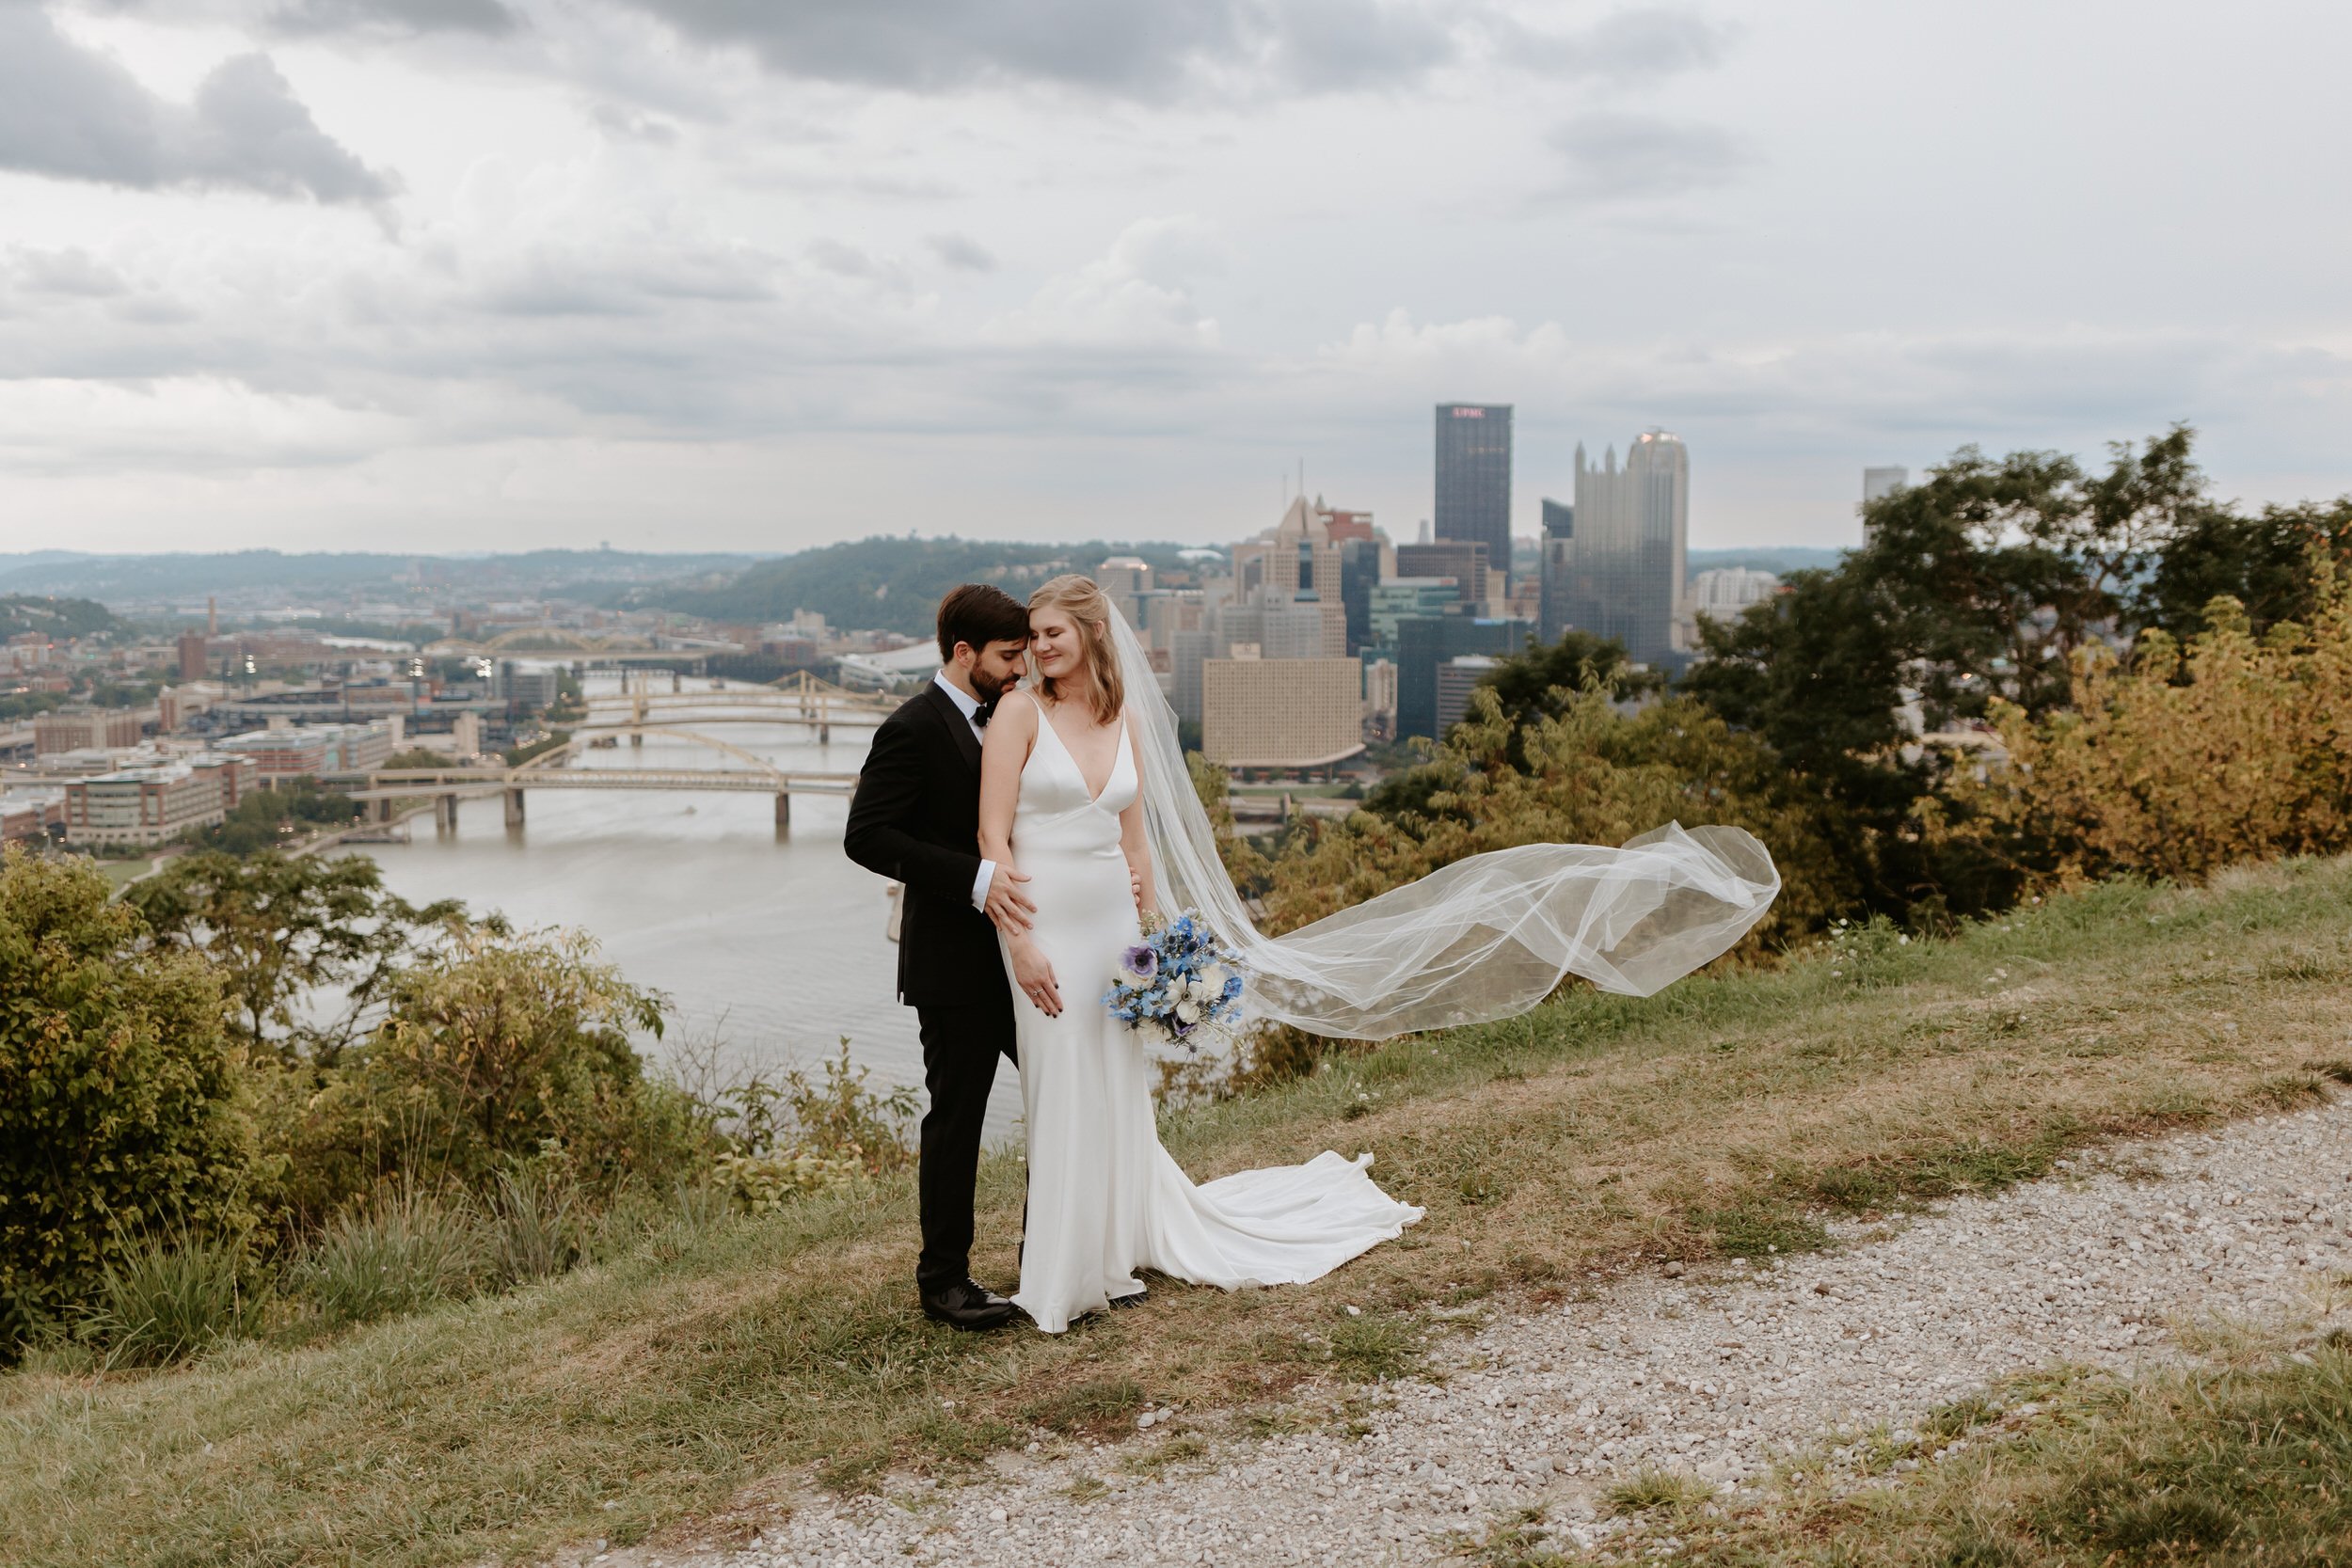 A bride and groom embrace while her veil blows in the wind, with Pittsburgh skyline behind them.